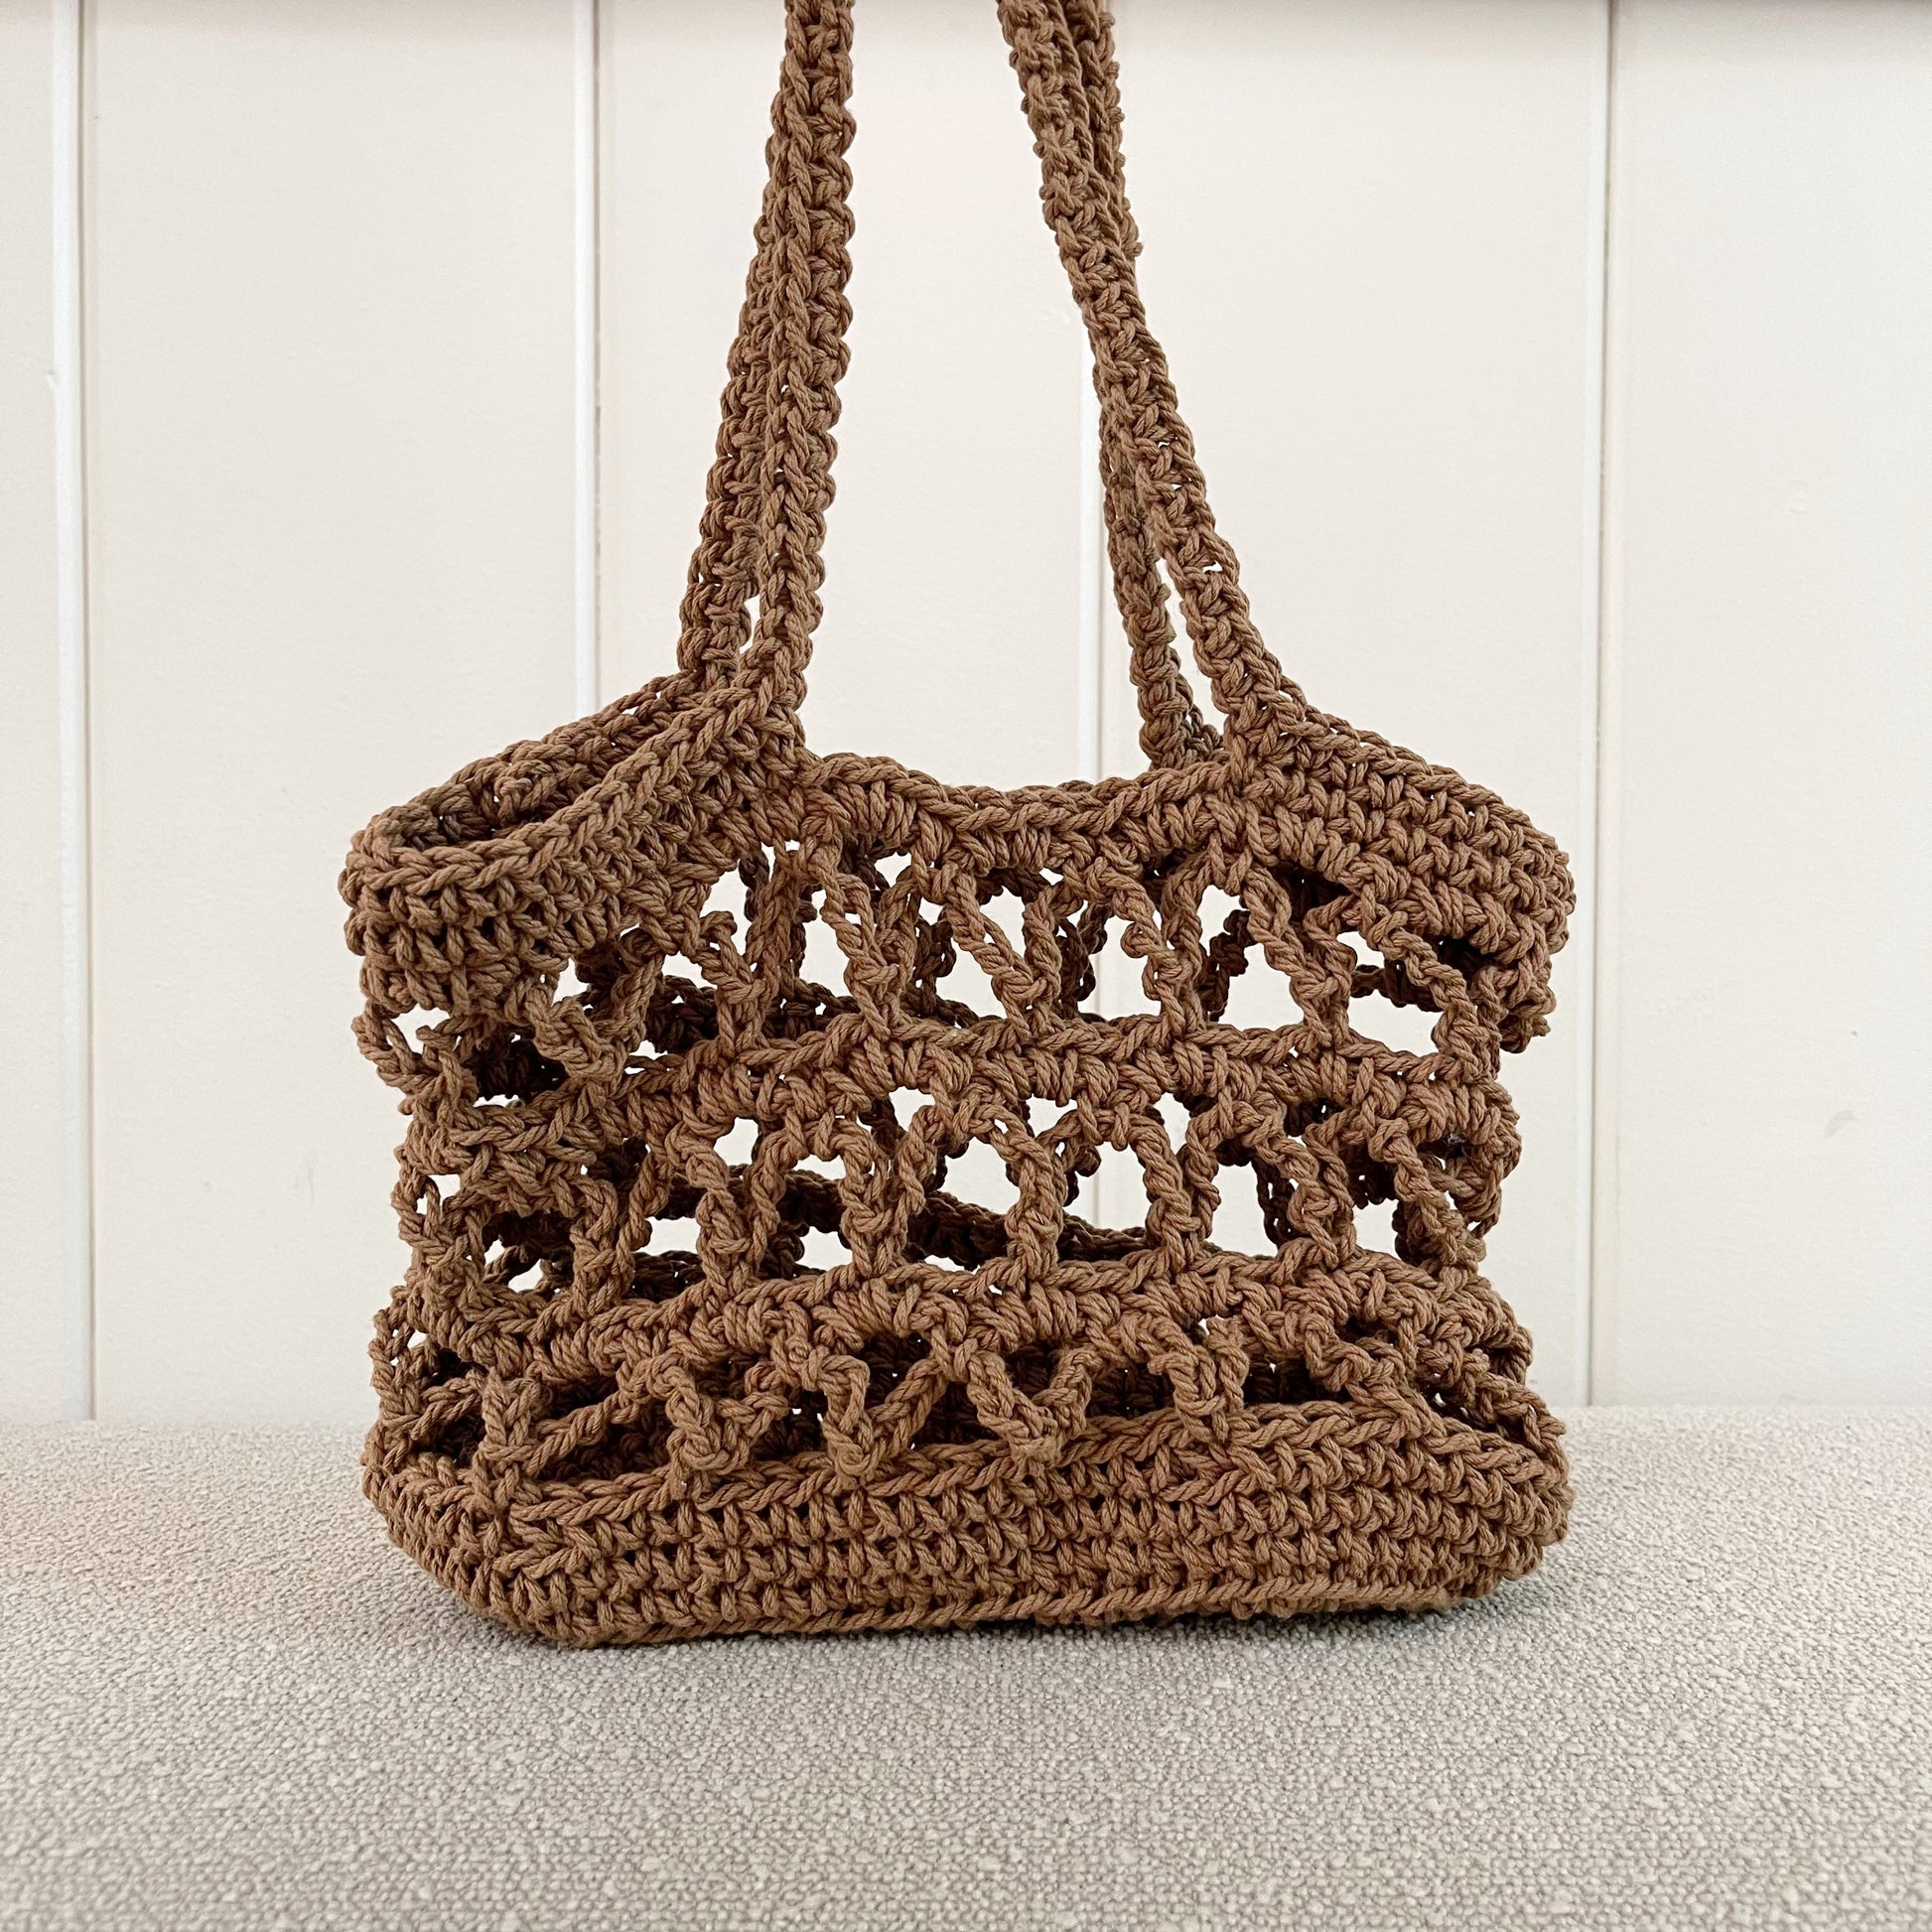 Picture of a crochet mesh handbag in brown. A great addition to any neutral wardrobe.   Measures 10" wide x 9" tall + a shoulder strap. Made of 100% cotton in brown. 